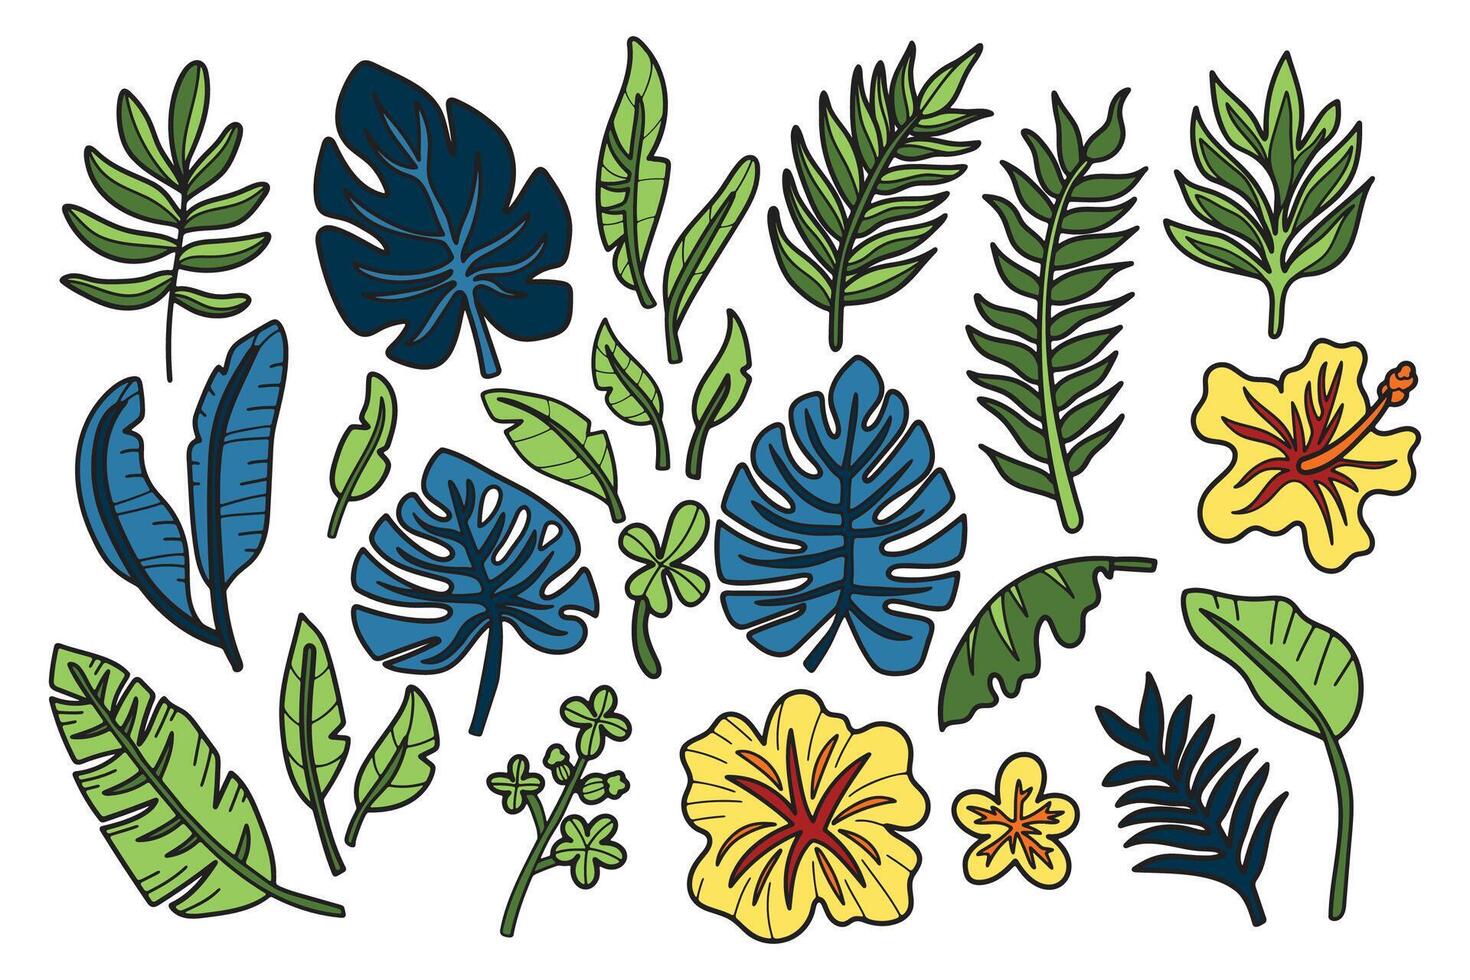 A collection of black and white drawings of various tropical plants and flowers vector